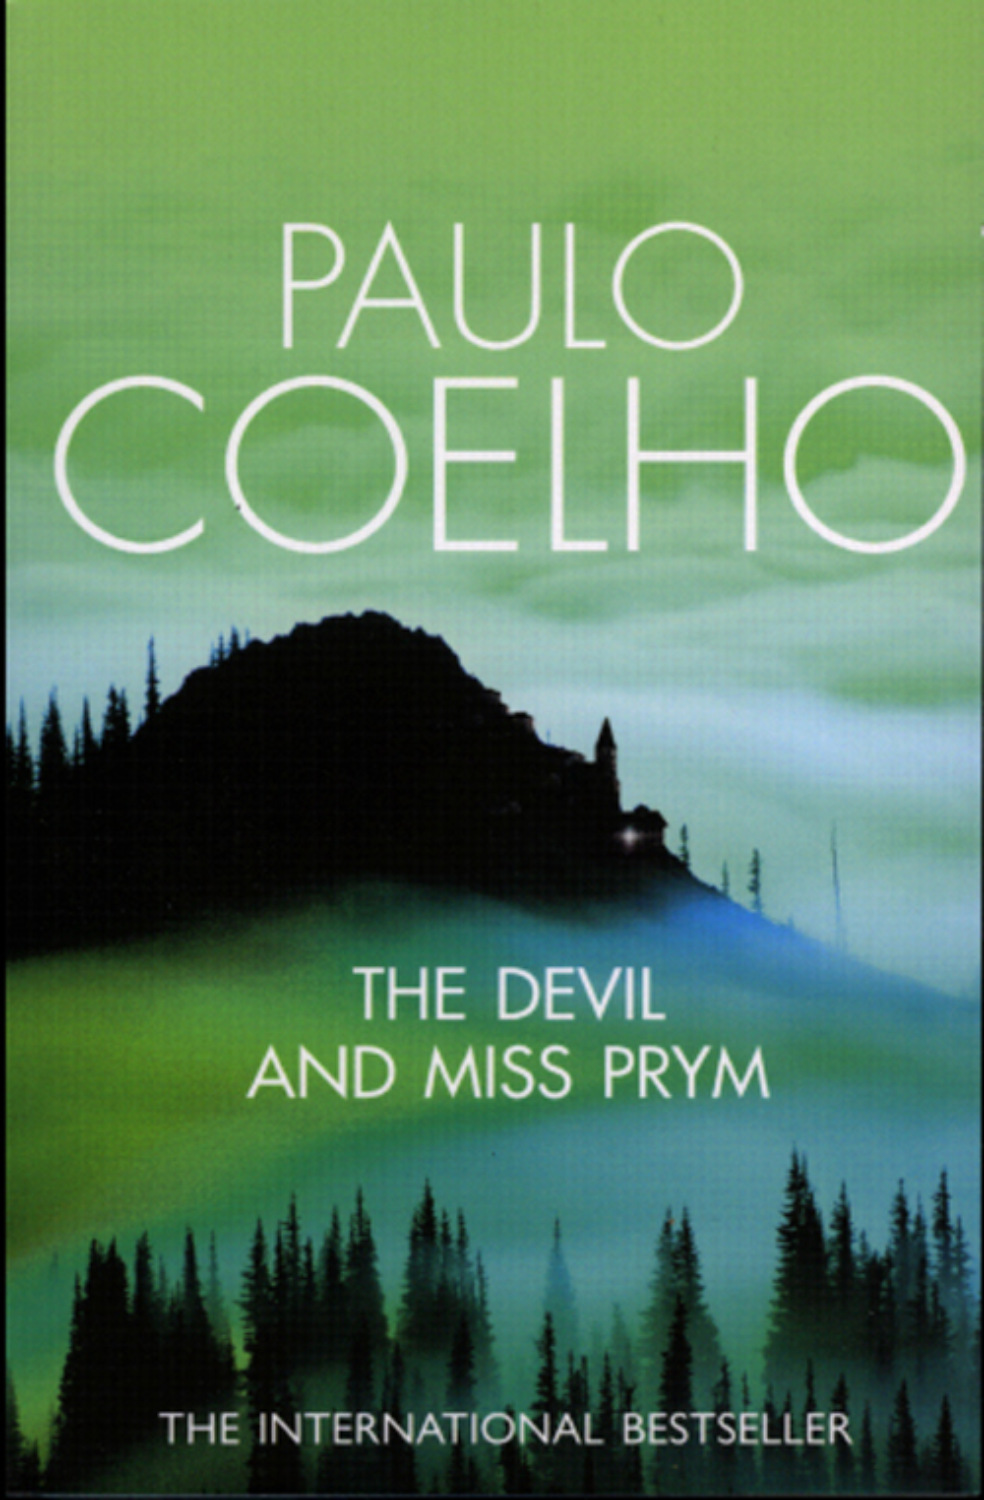 Paulo Coelho, The Devil and Miss Prym – read online at LitRes